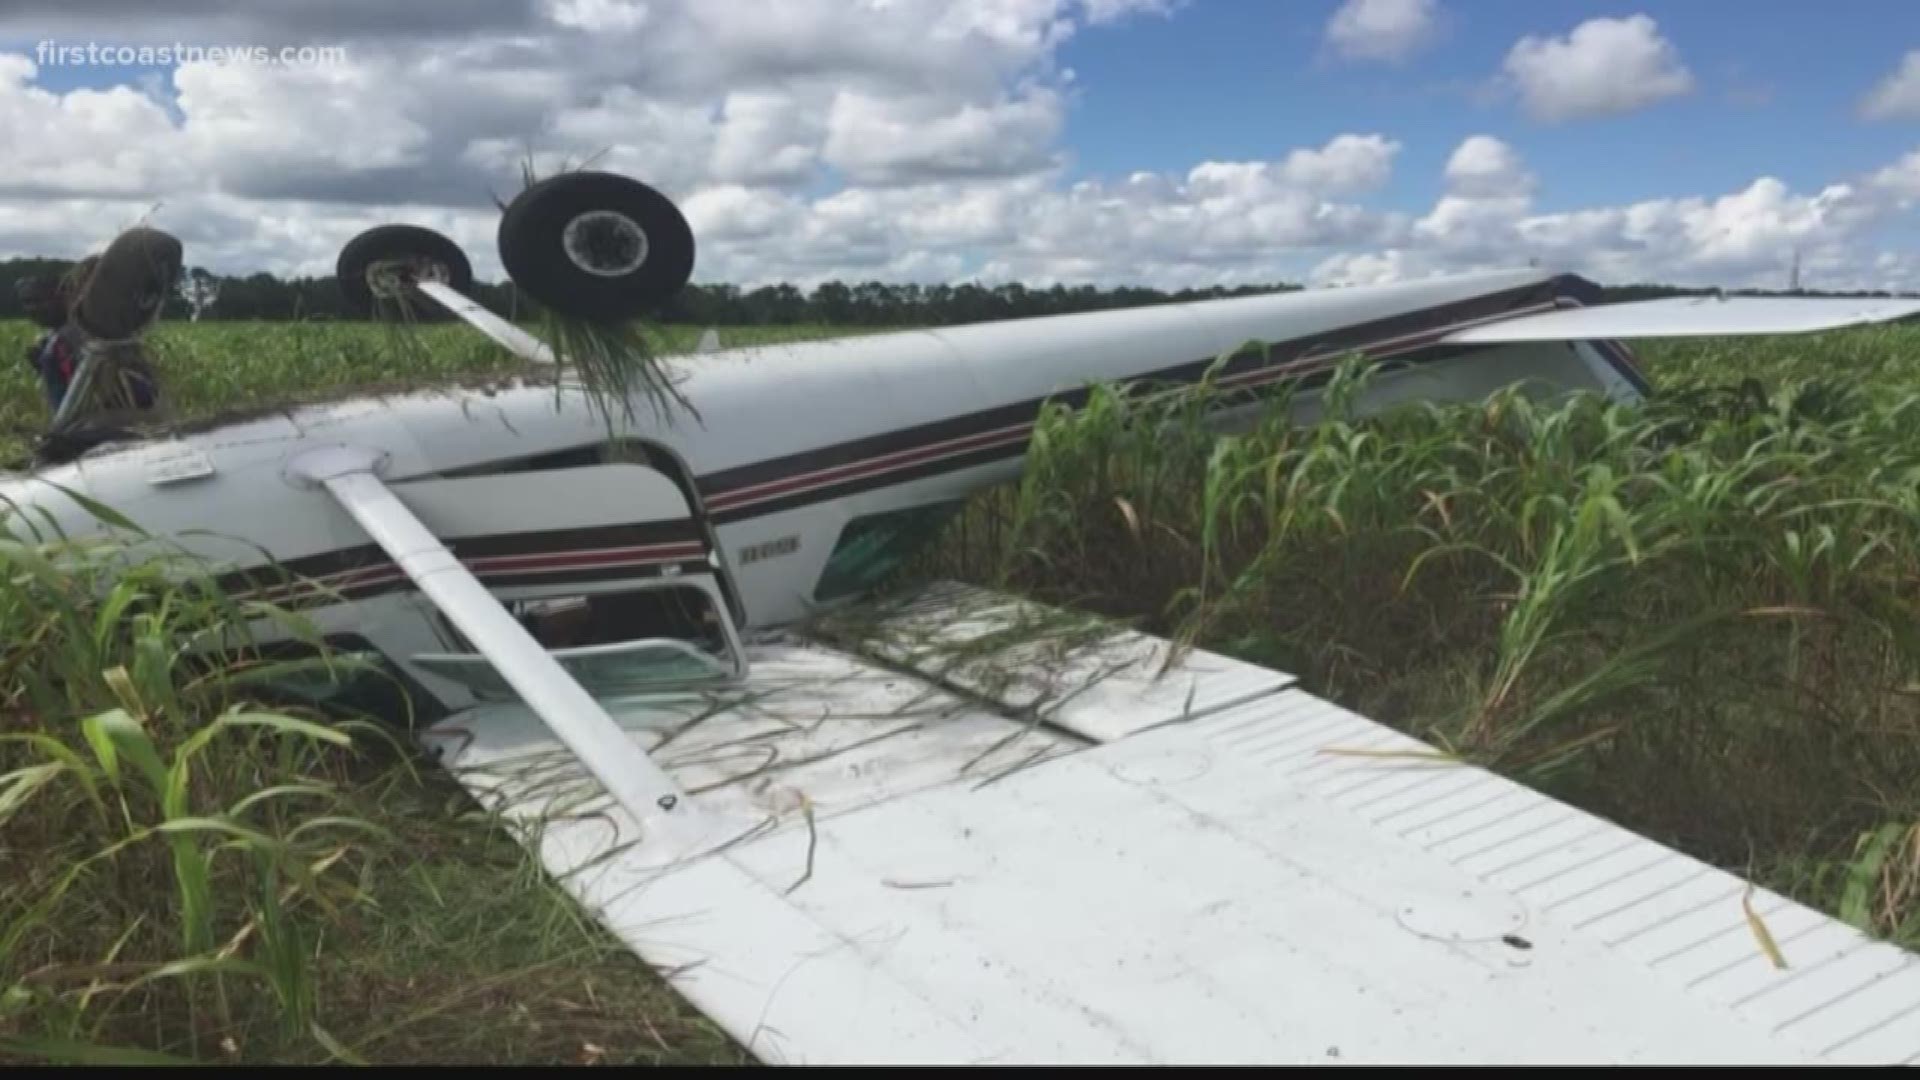 FHP said the pilot, identified as 19-year-old Shrey Chopra of Daytona Beach, was flying back to Ormond Beach after stopping at a Palatka airport when he experienced mechanical failure. He made an emergency landing in a farm field.